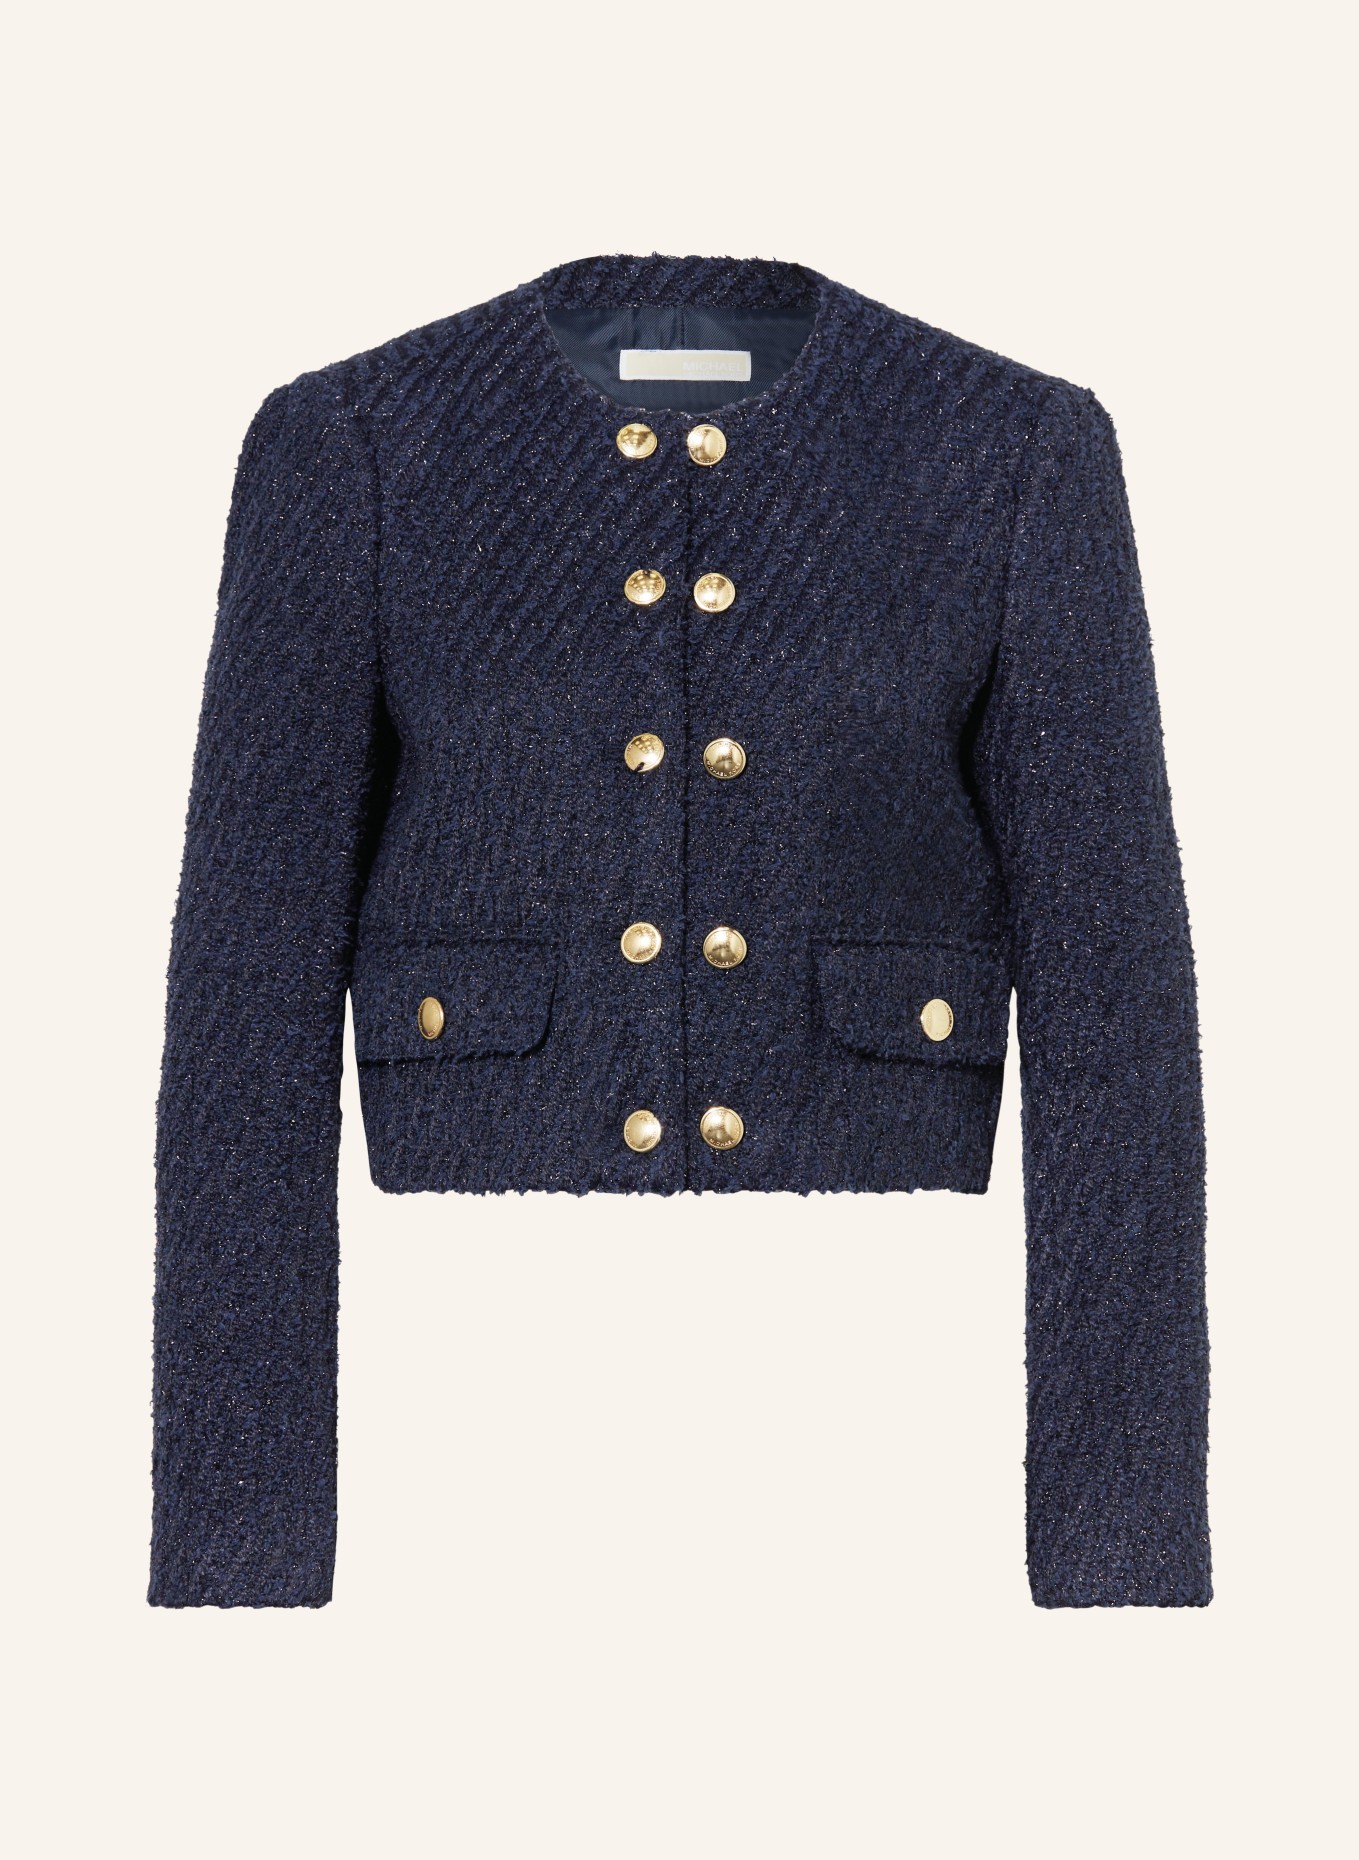 MICHAEL KORS Boxy jacket made of tweed with glitter thread, Color: DARK BLUE (Image 1)